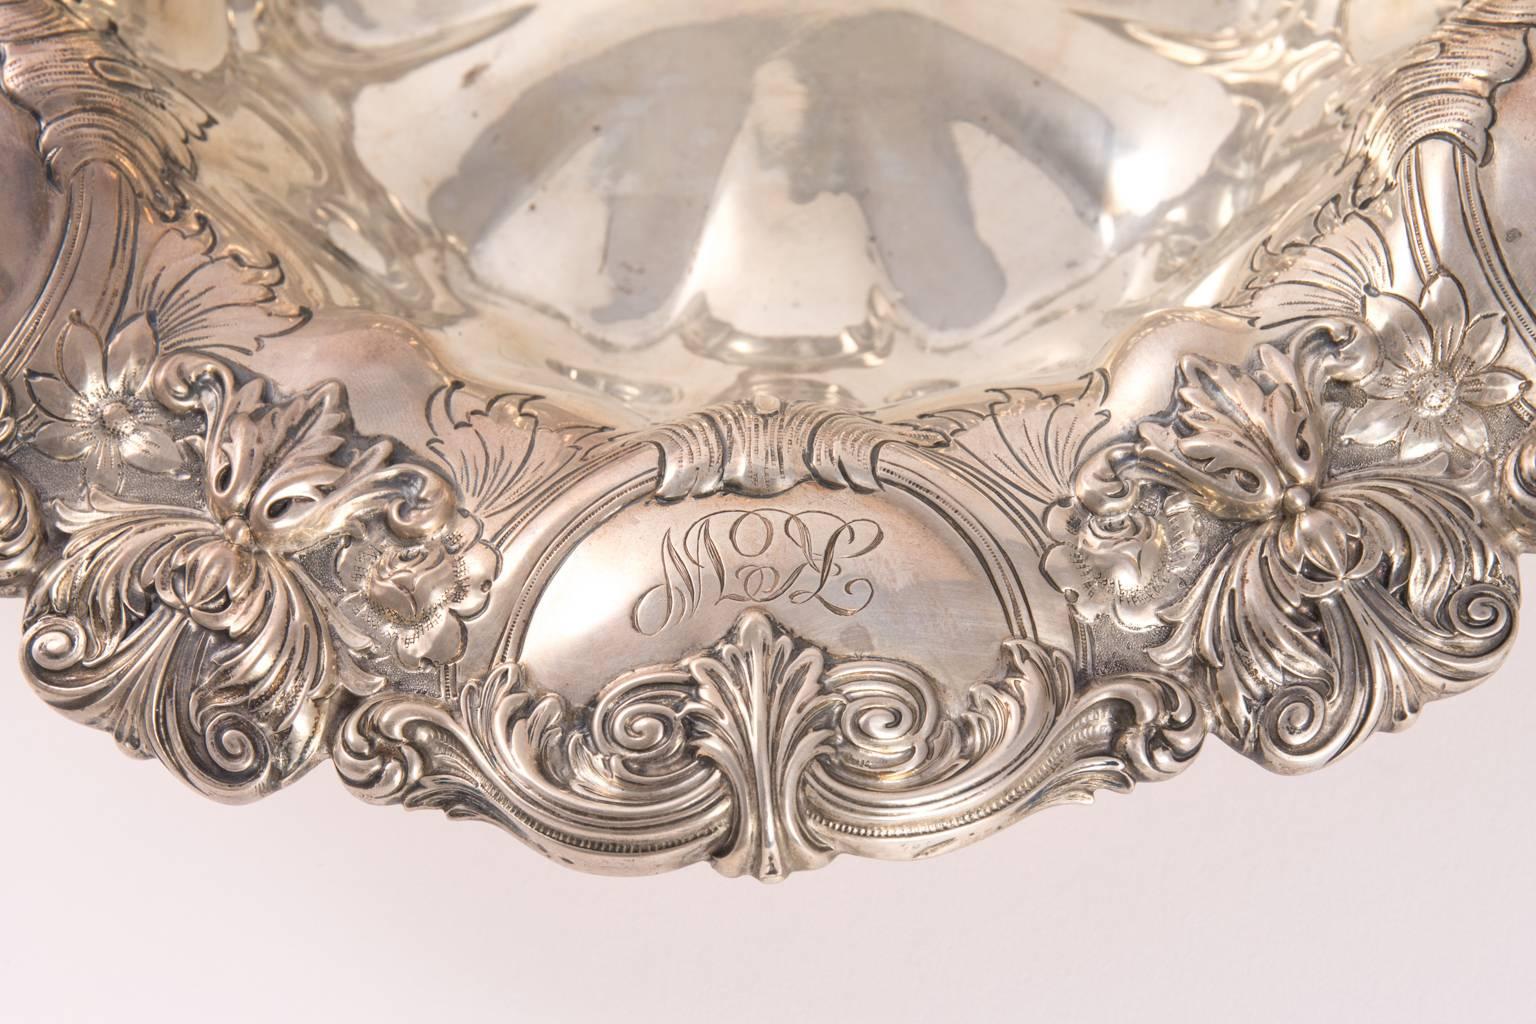 Late 19th Century Sterling Silver Gorham Ornate Bowl